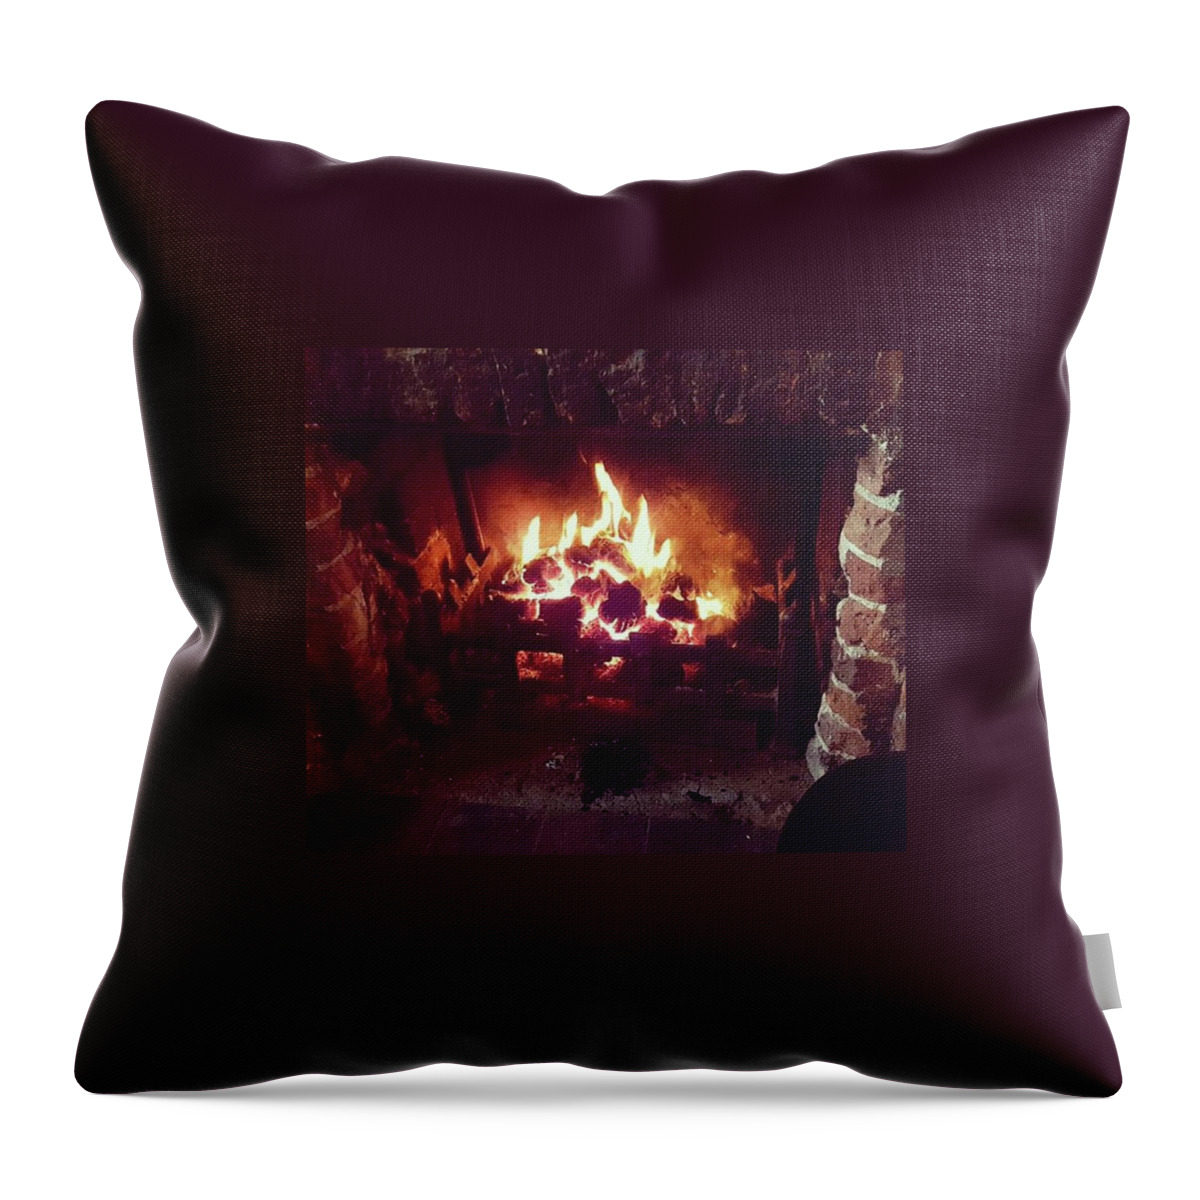 Cosynightsin Throw Pillow featuring the photograph Heart Of The Home by Rowena Tutty